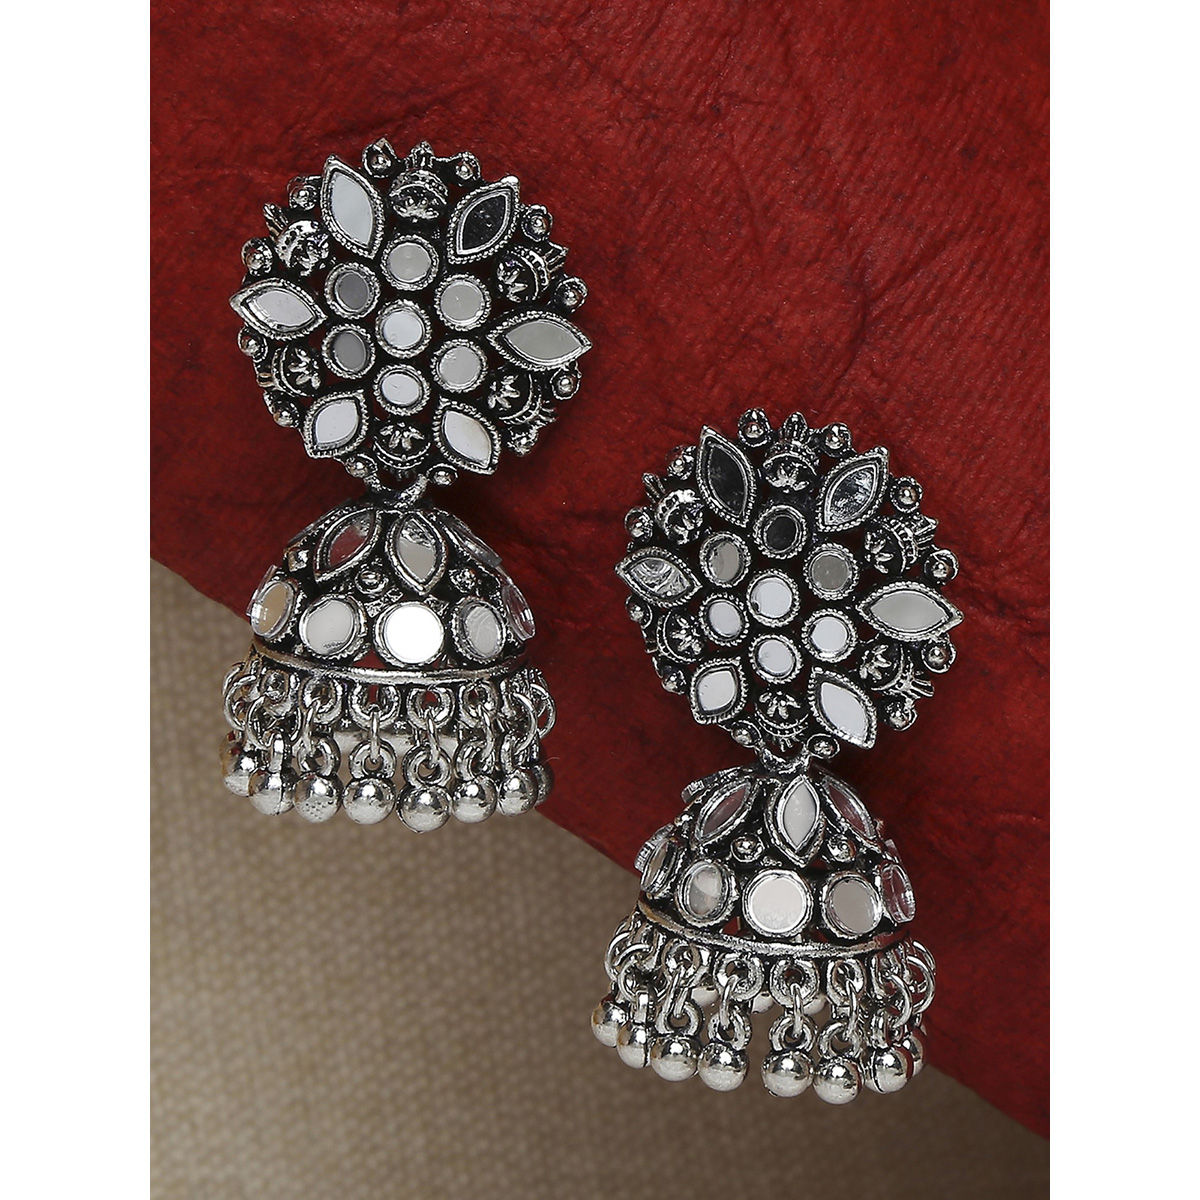 Shop Handcrafted Oxidised Silver Earrings  Silver Earring  The Fine World   The Fineworld